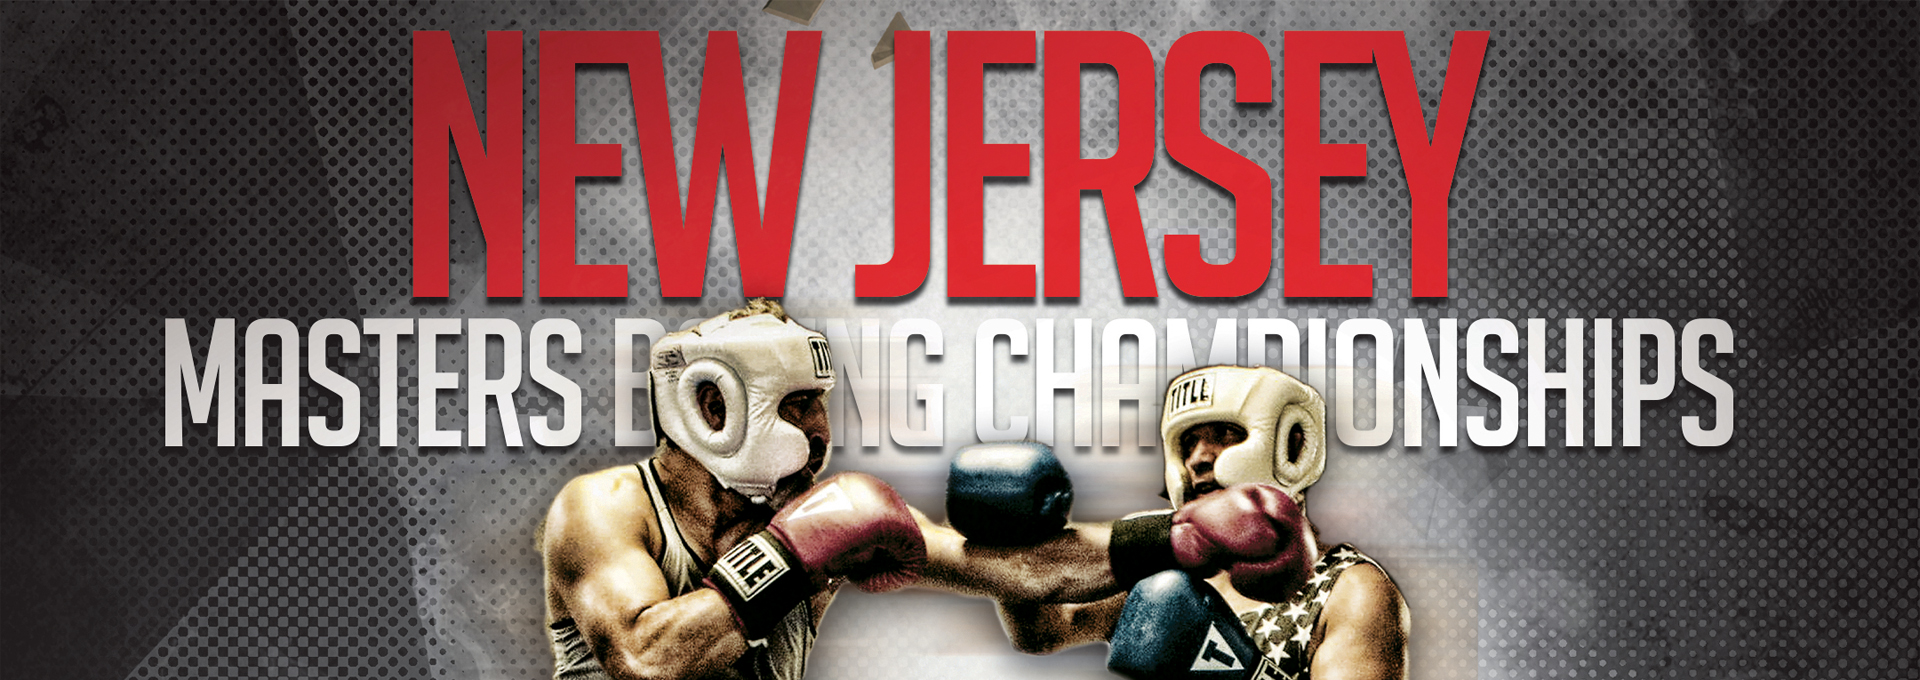 New Jersey Masters Boxing Championships